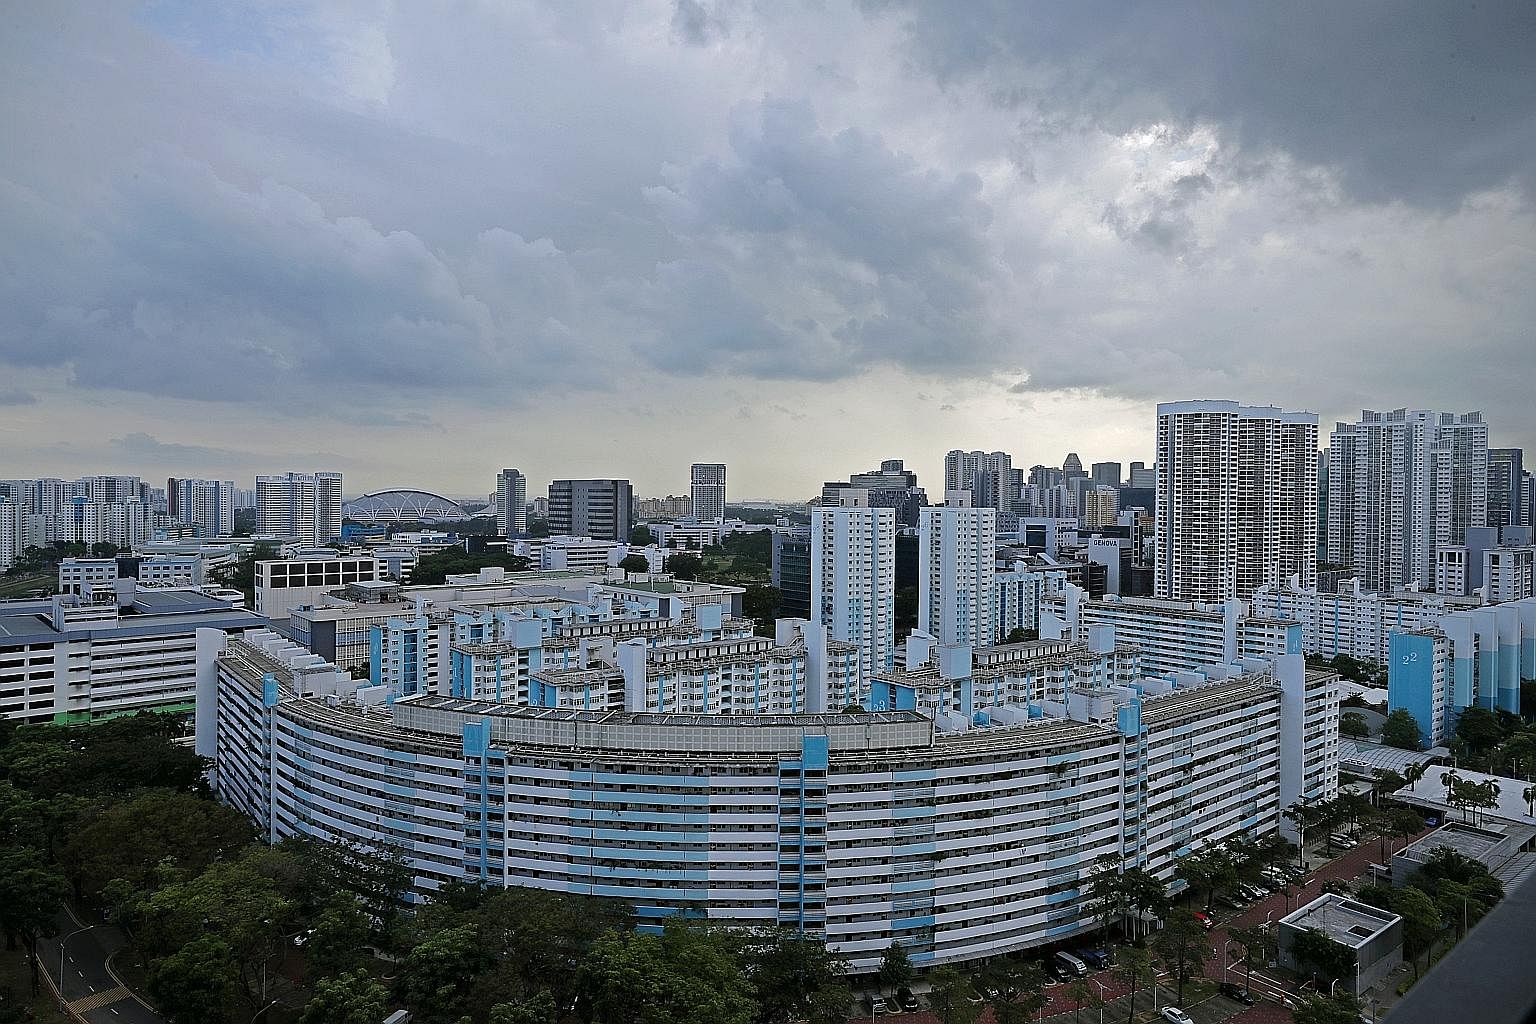 1963: When Selegie House was completed, it was the tallest mixed-development building in Singapore comprising both residential units and commercial shops. 1968: The unique Y-shaped Block 53 Toa Payoh Lorong 5, as seen from Gem Residences. The block w